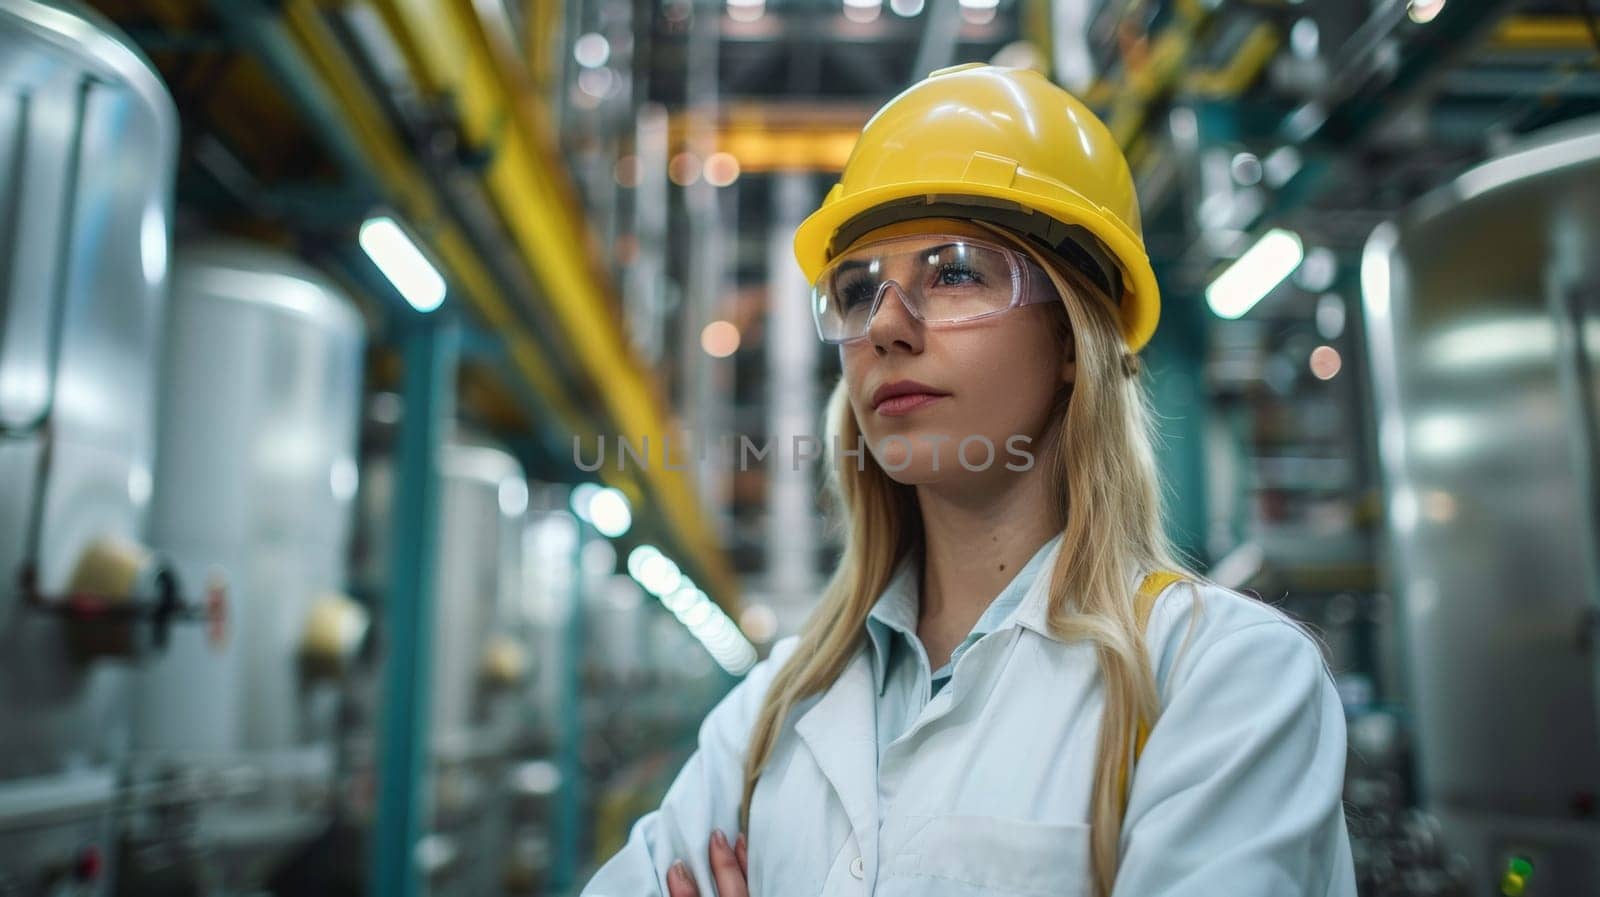 A woman in a hard hat and safety glasses standing inside of an industrial building